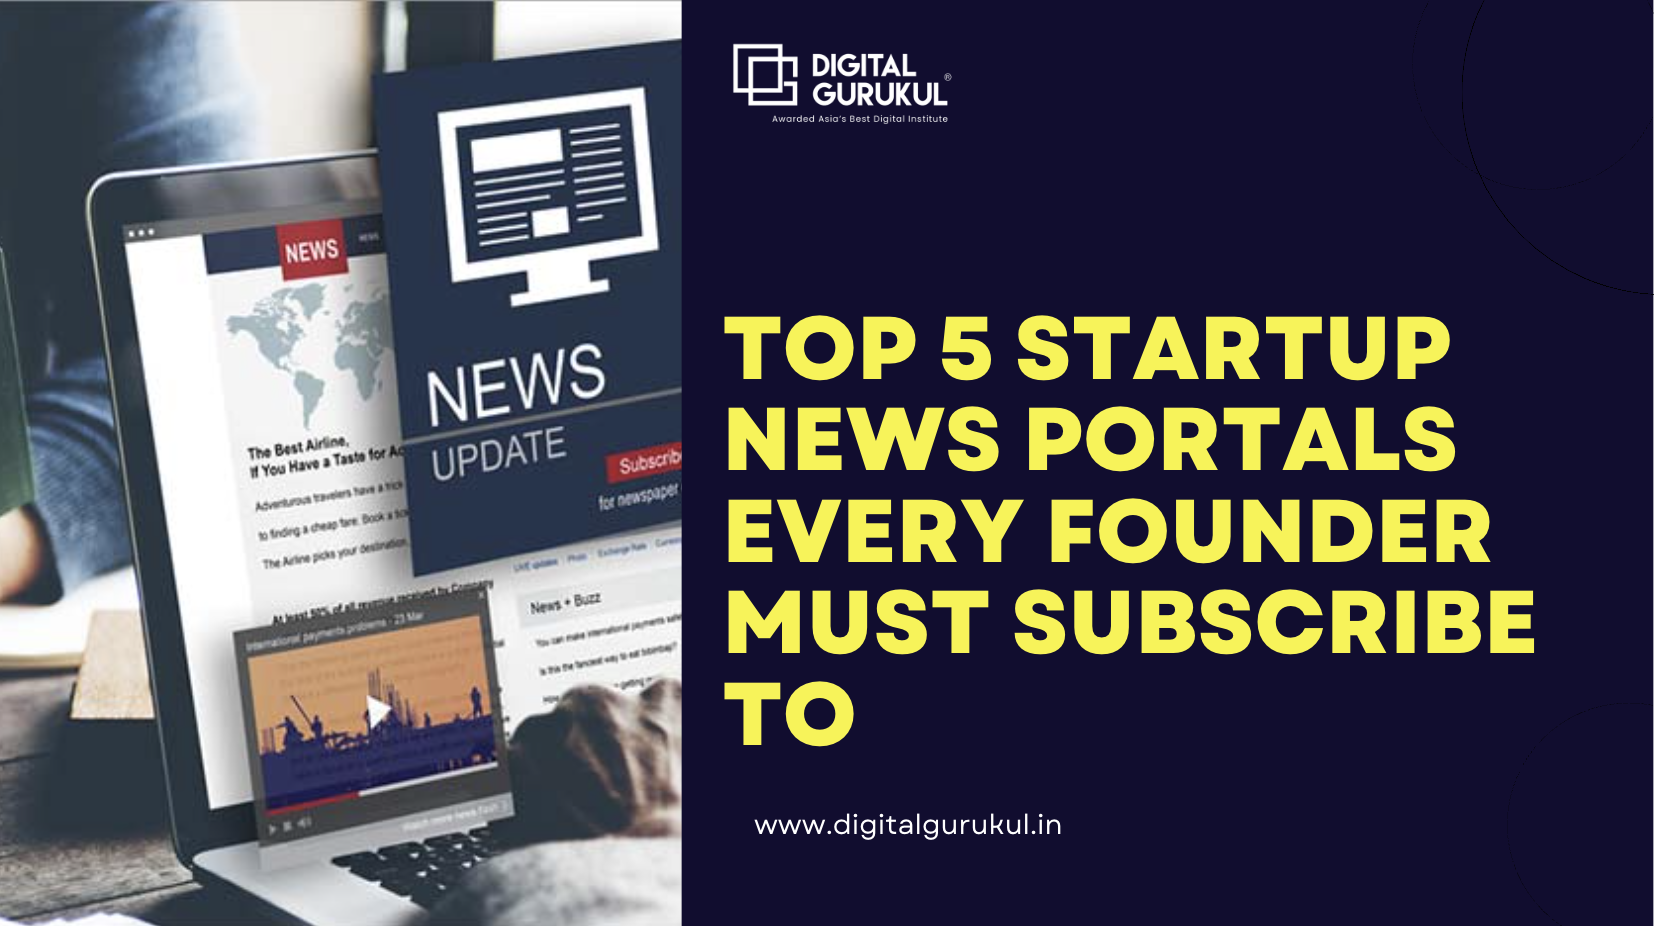 Top 5 startup news portals every founder must subscribe to